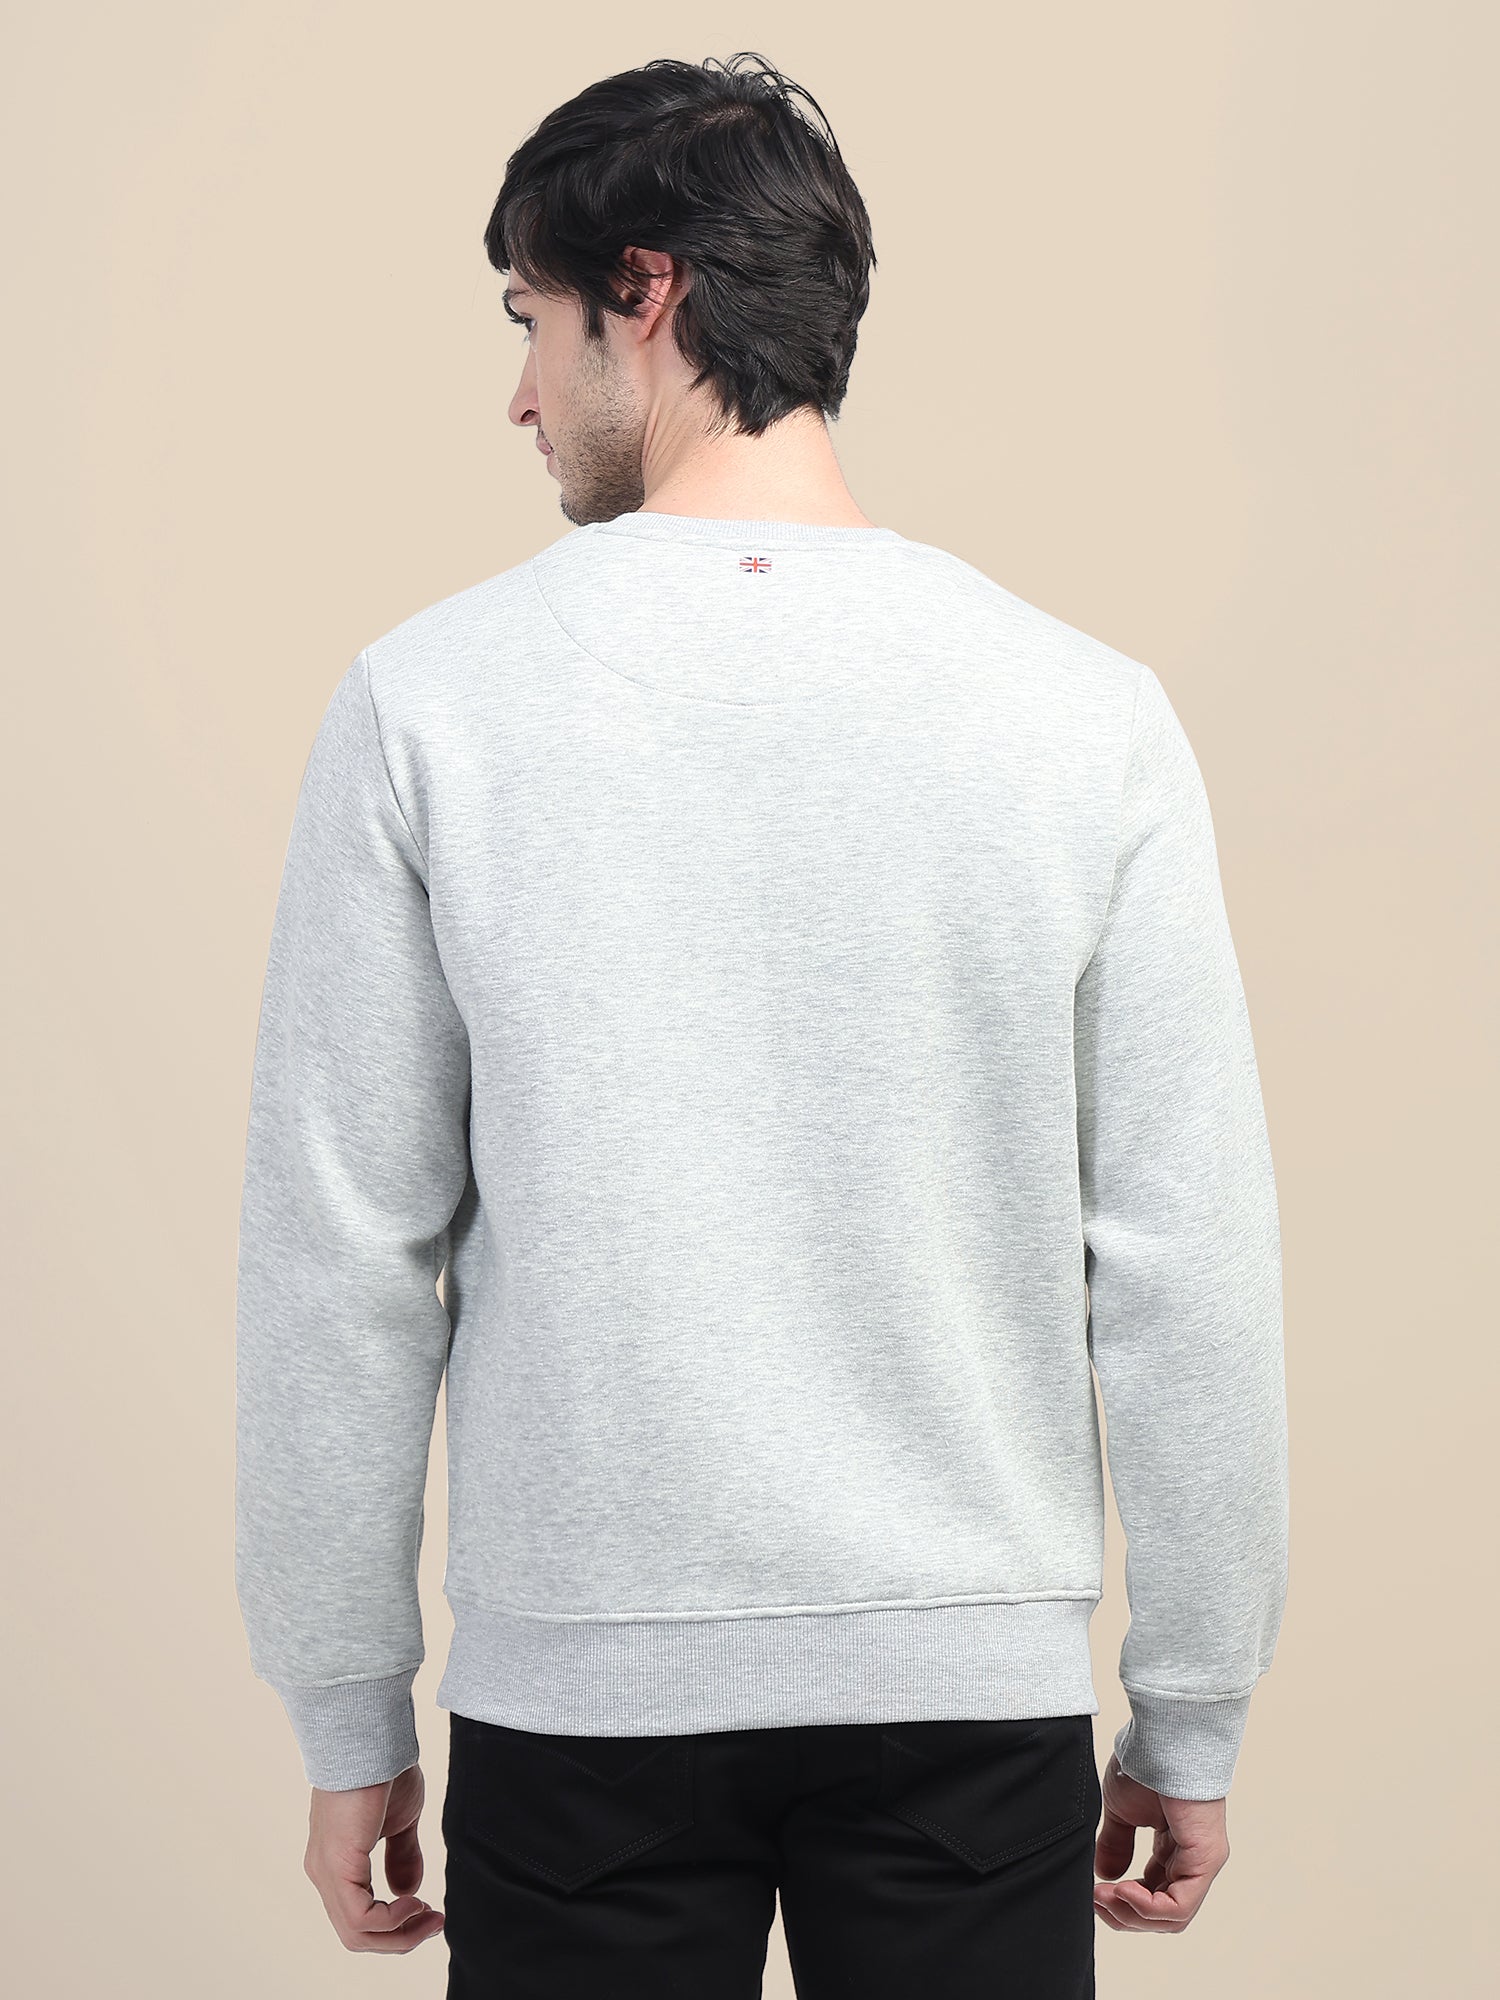 AMSWAN MEN'S GREY SOLID COMFORT: PREMIUM COTTON SWEATSHIRT FOR TIMELESS STYLE AND COZY ELEGANCE